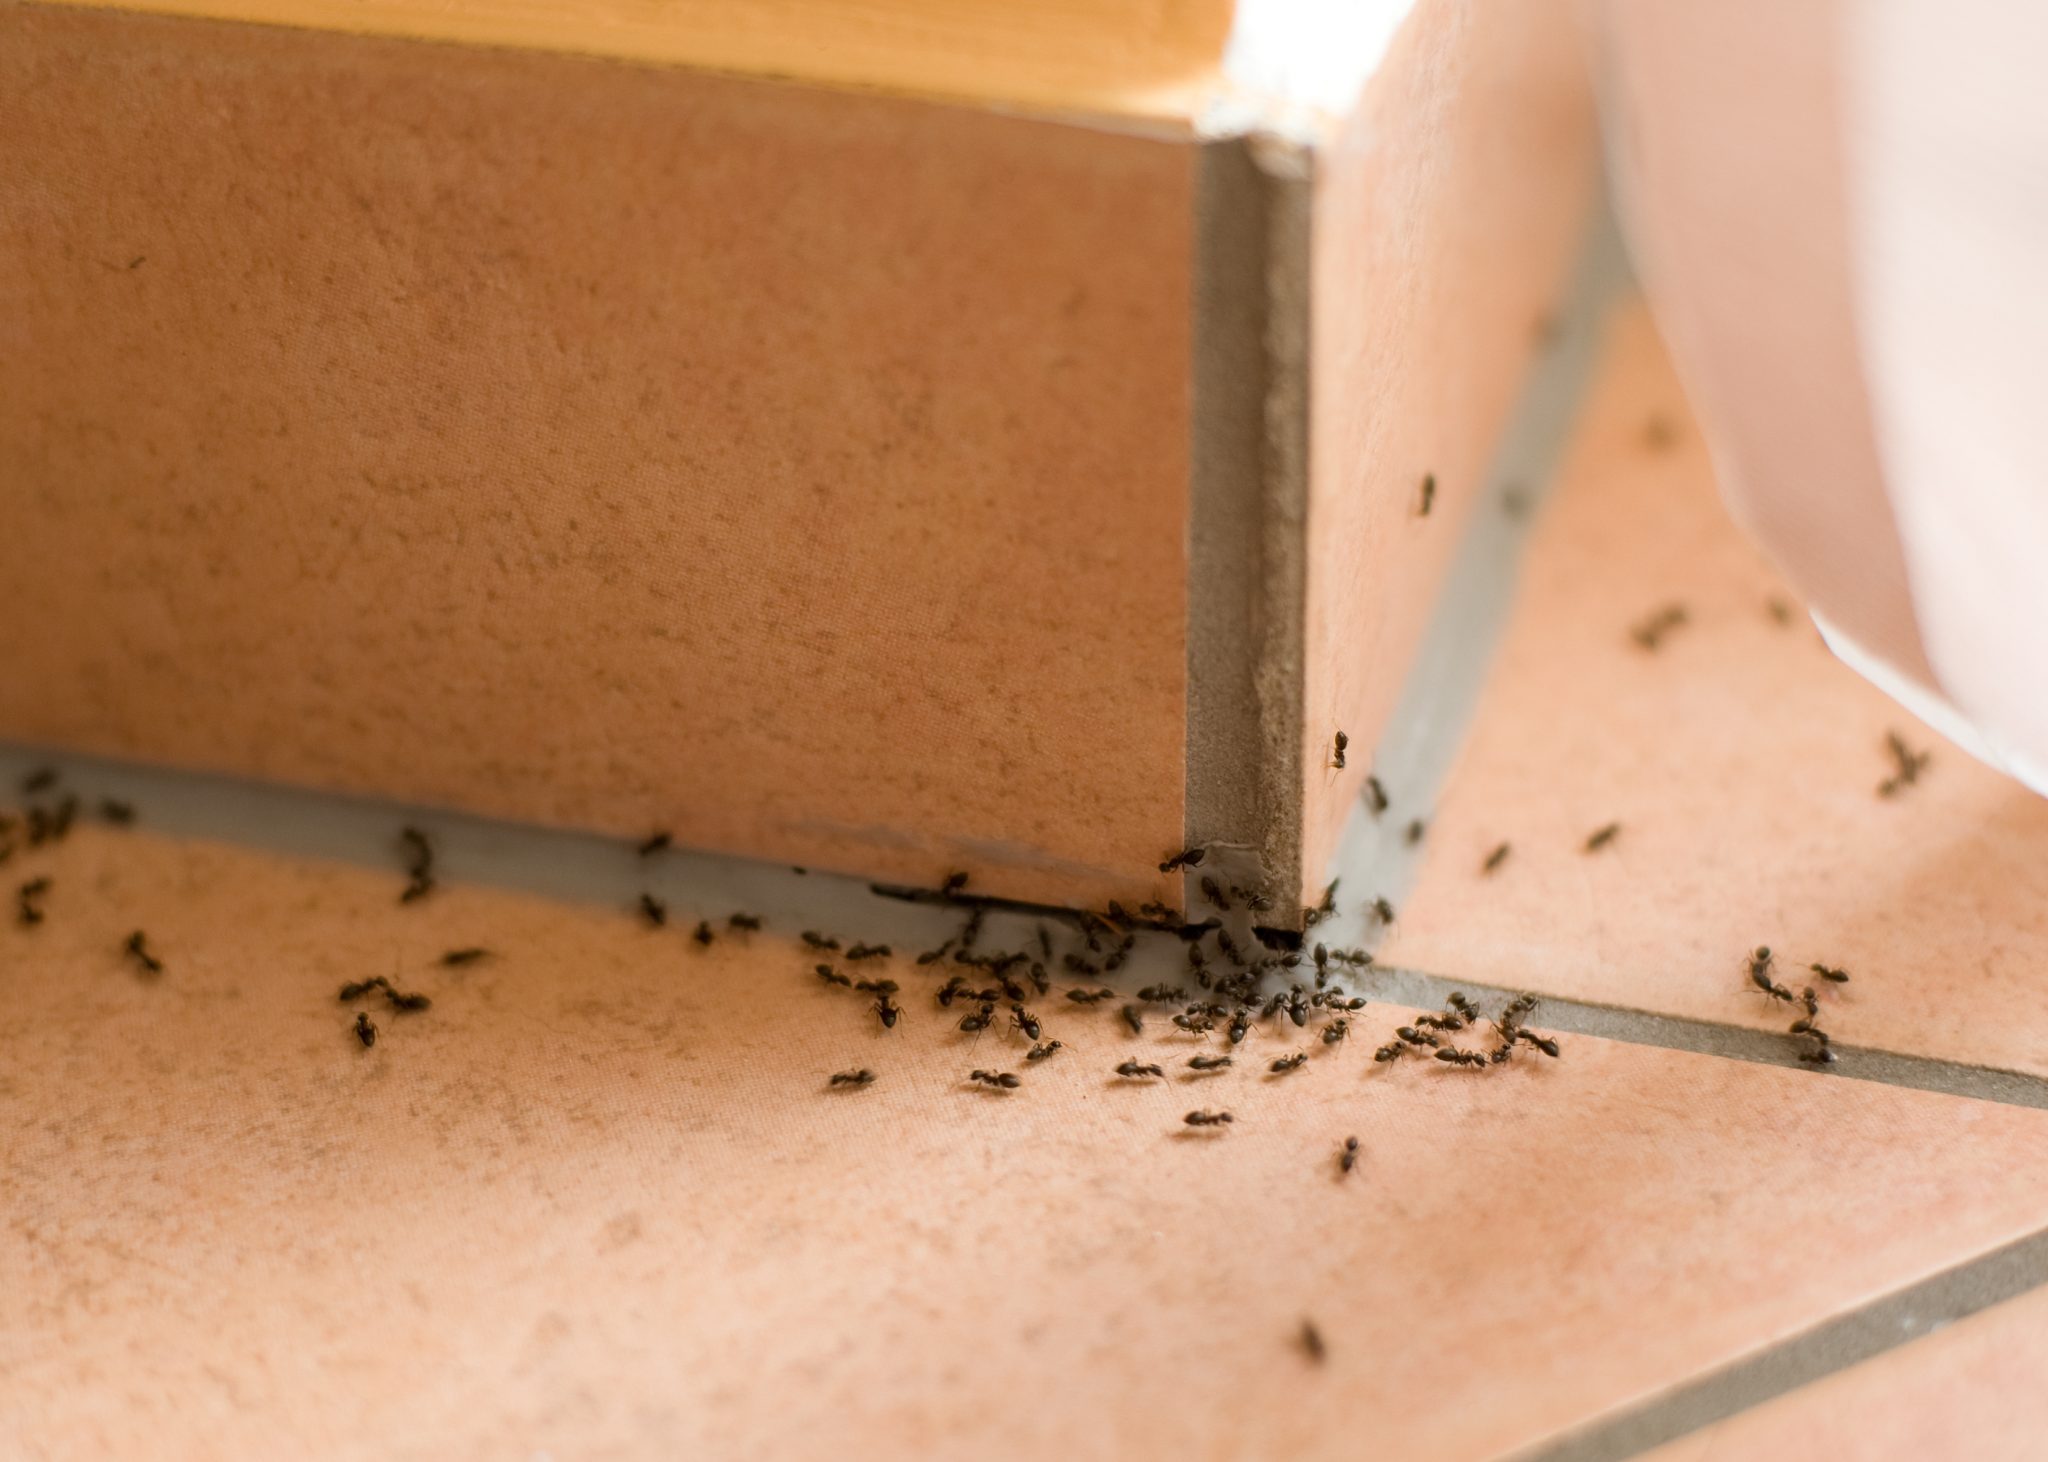 home-remedies-make-ant-problem-worse